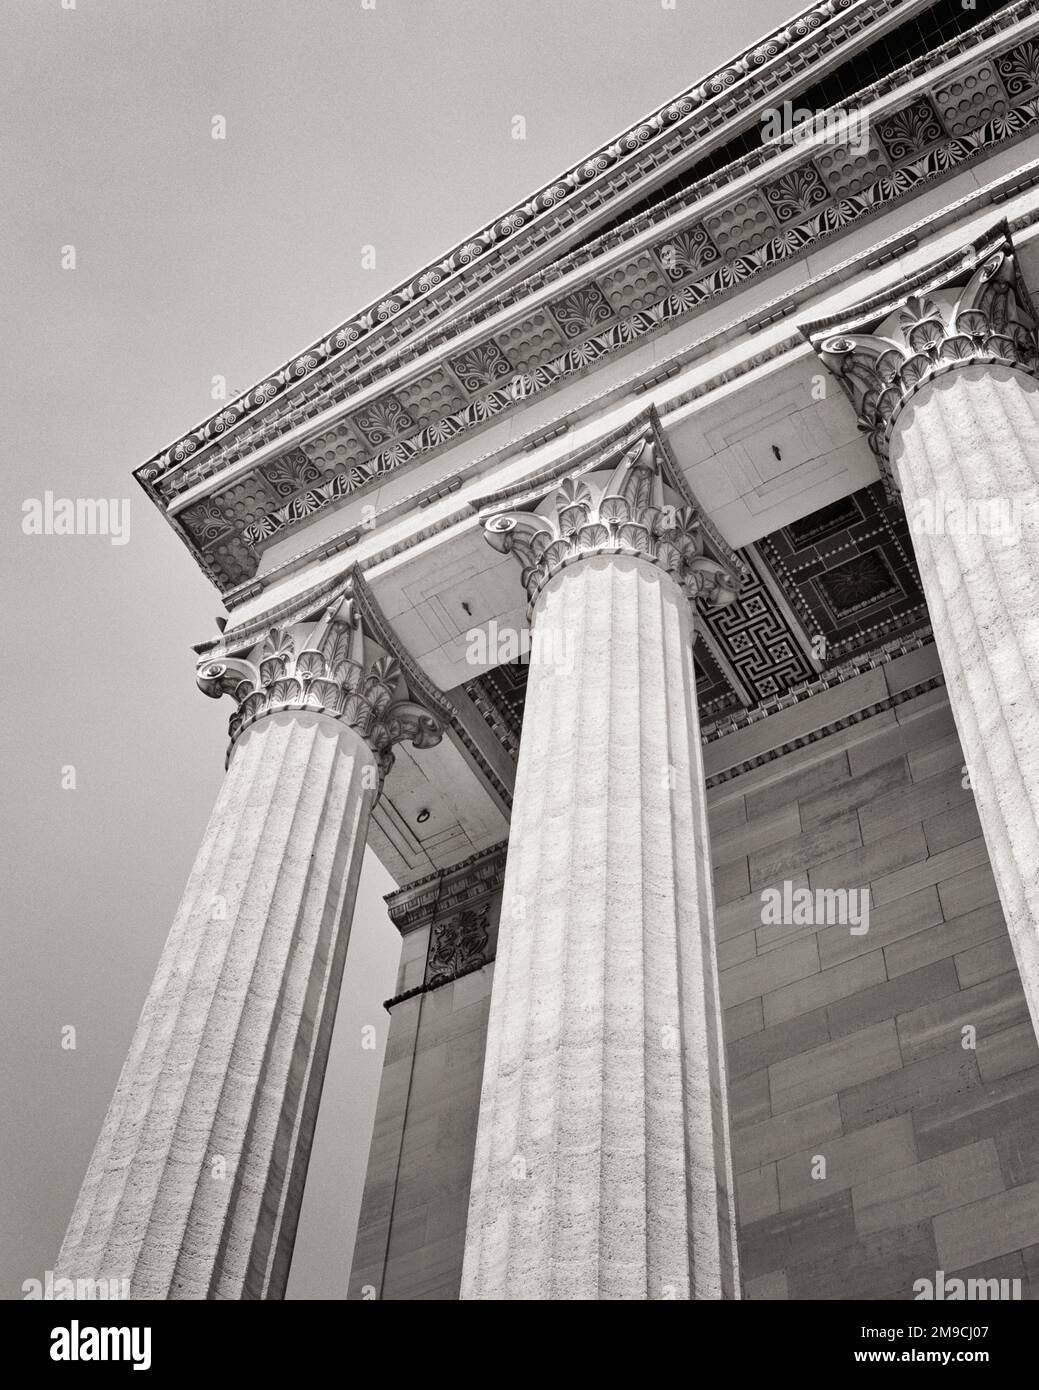 1960s LOOKING UP THE LENGTH OF TWO CORINTHIAN ORDER COLUMNS  - s13256 HAR001 HARS SYMBOLIC ARCHITECTURAL DETAIL CONCEPTS CREATIVITY PRECISION BLACK AND WHITE HAR001 OLD FASHIONED REPRESENTATION SCROLLS Stock Photo